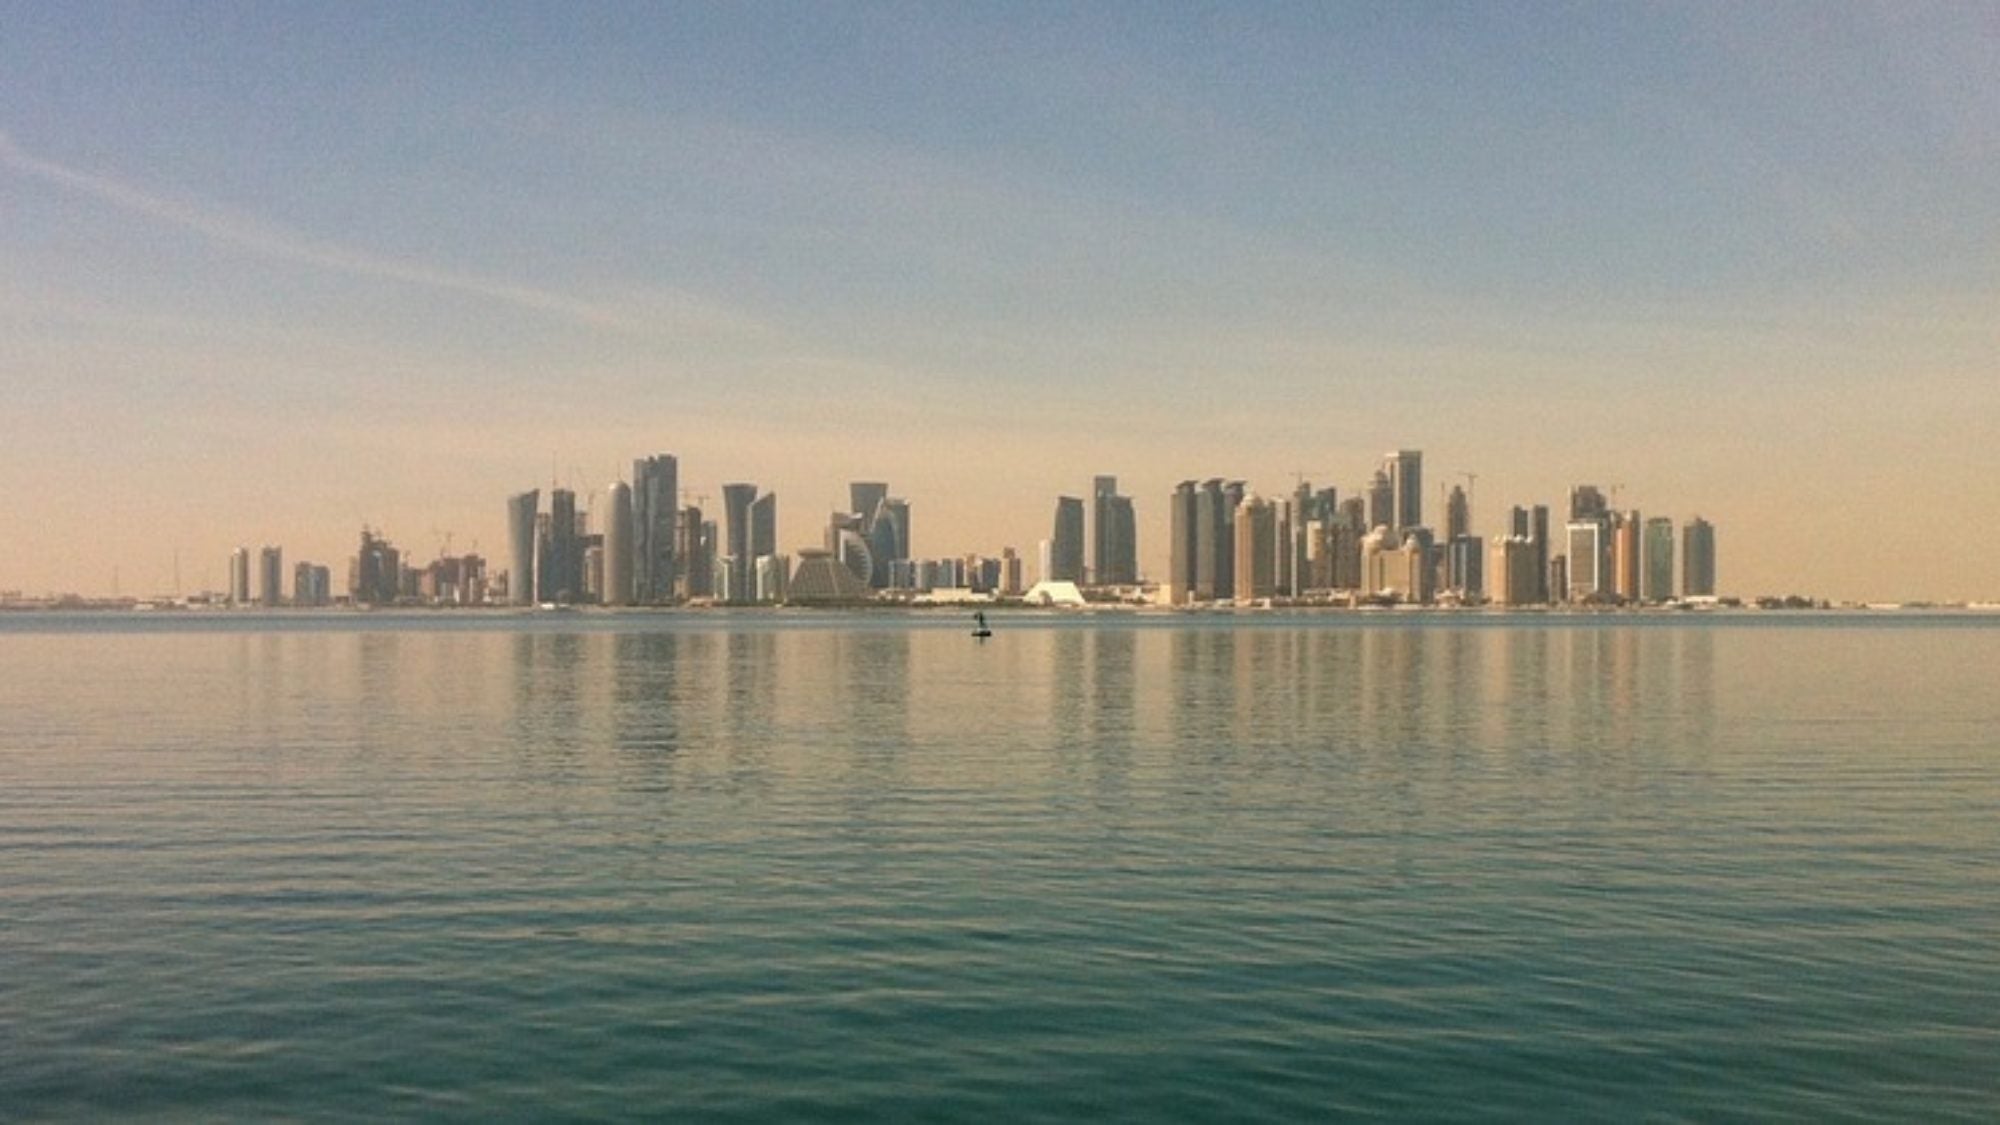 The skyline of Doha, Qatar, taken from the water.